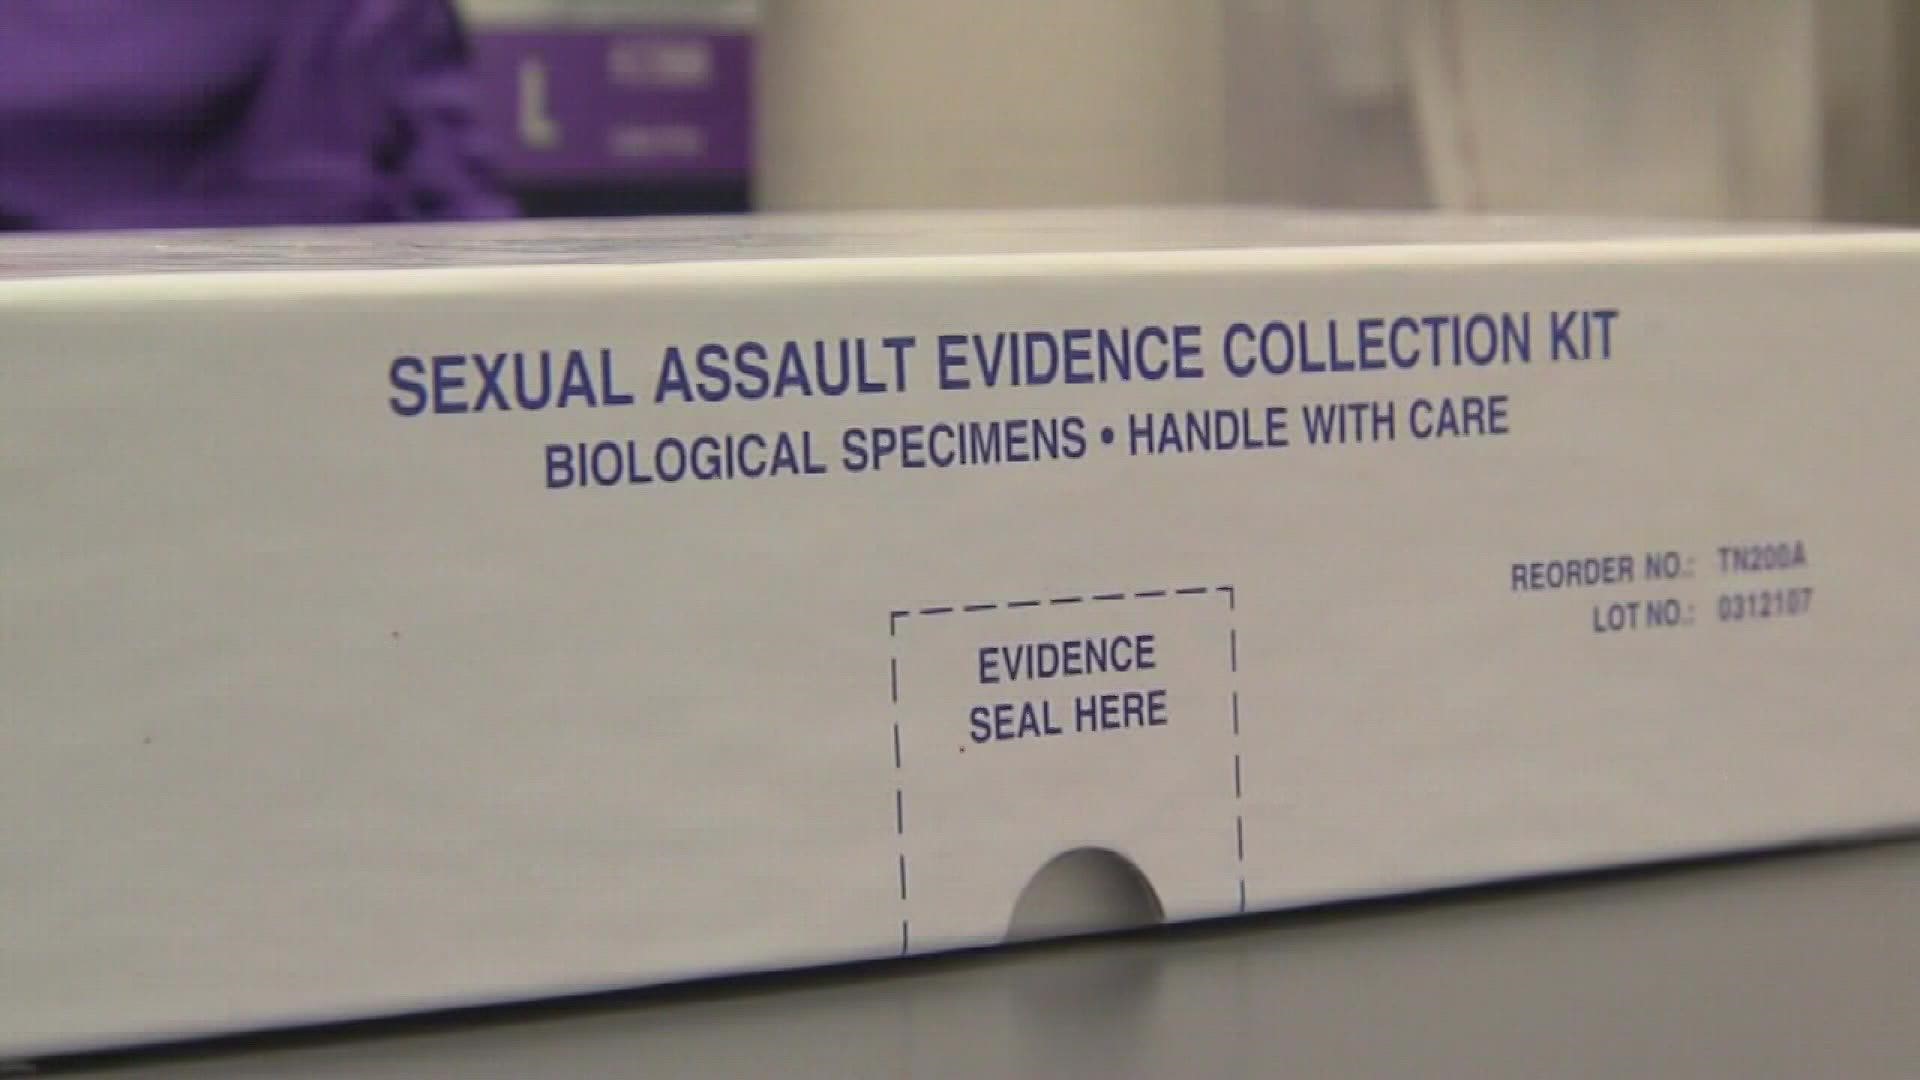 The bill requires teams to have members with expertise in fields related to sexual assault response such as victim advocacy or mental health services.